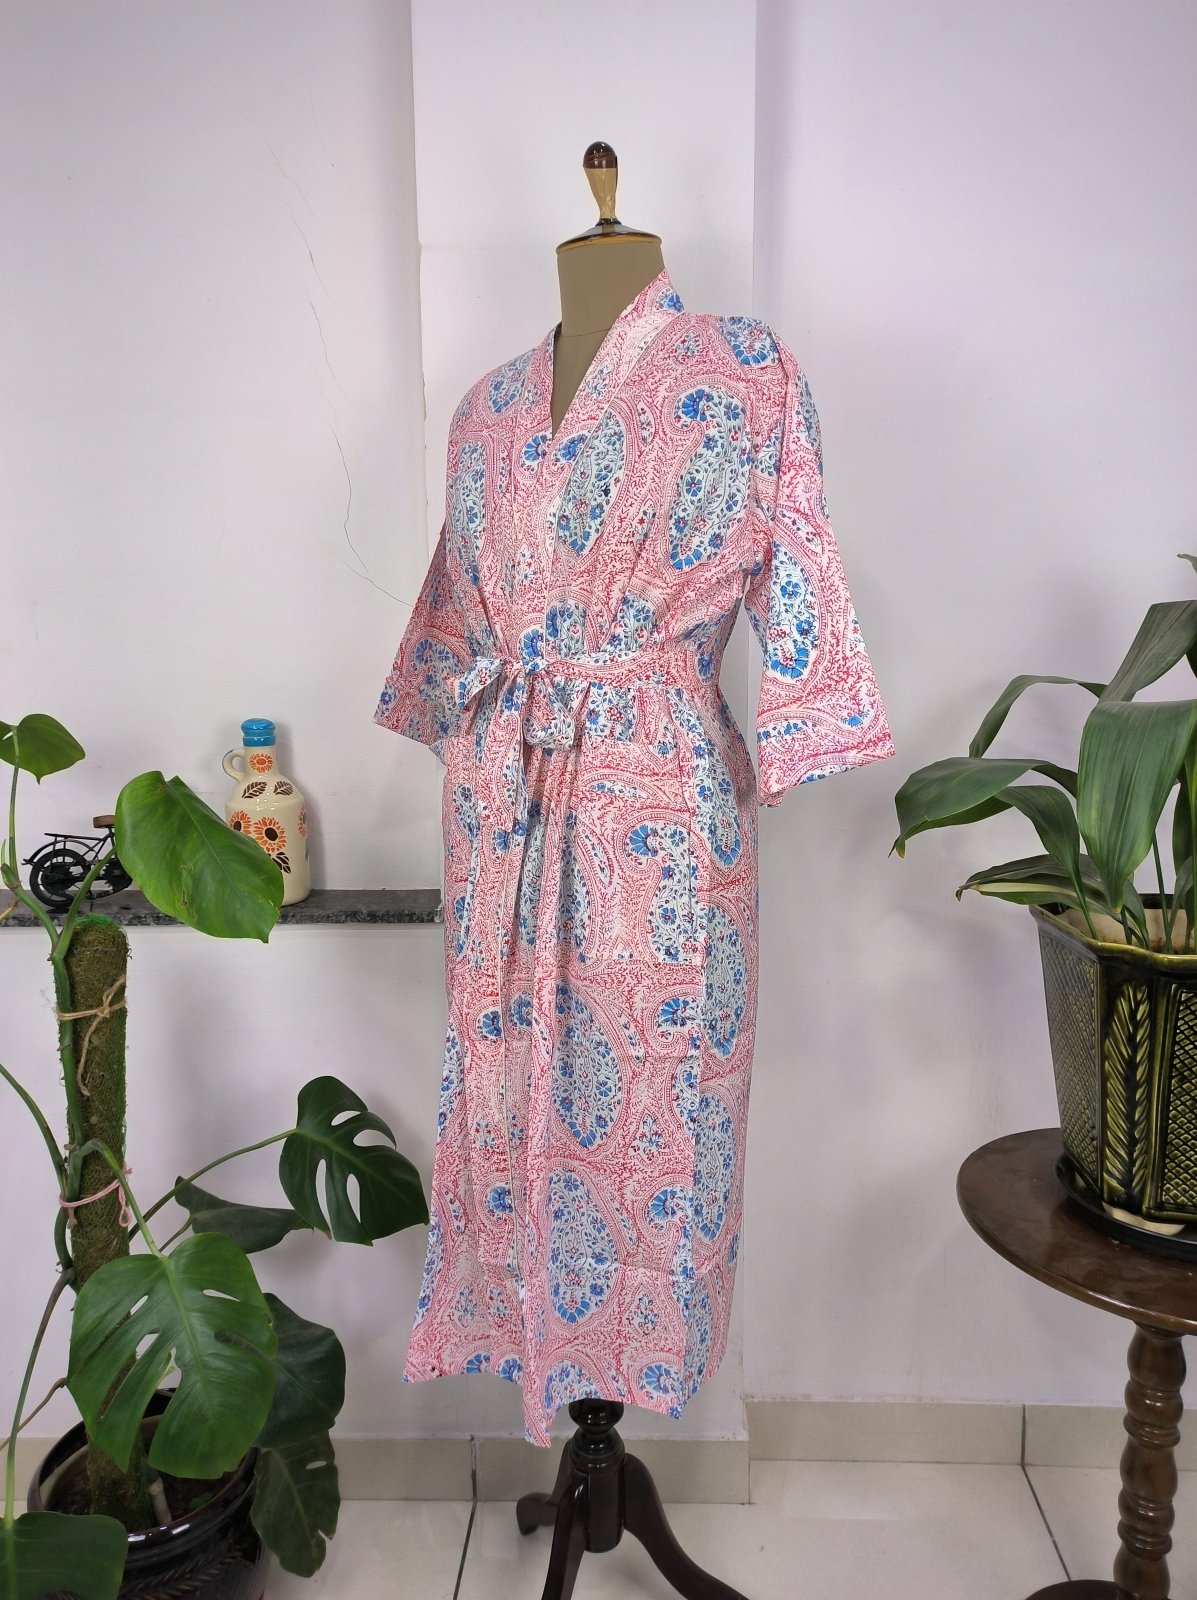 Boho House Robe Indian Handprinted Cotton Kimono Persian Paisley | Perfect for Summer Luxury Beach Holidays Yacht Cover Up Stunning Dress - The Eastern Loom